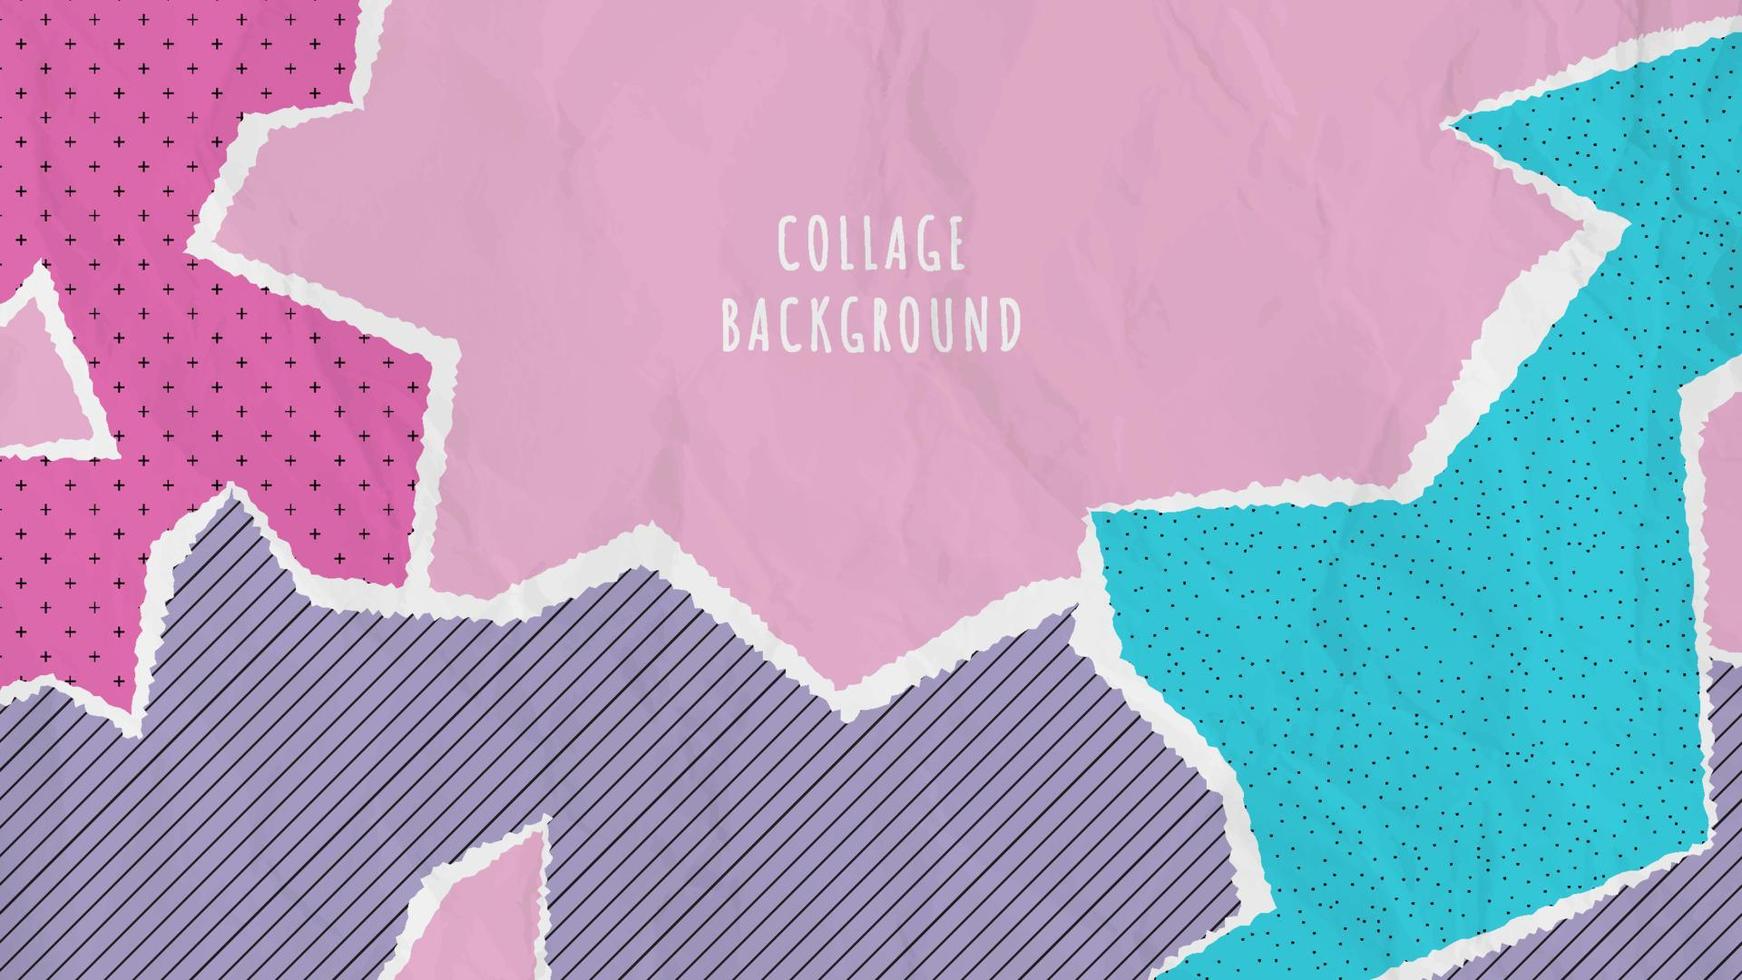 Abstract collage background with torn paper vector